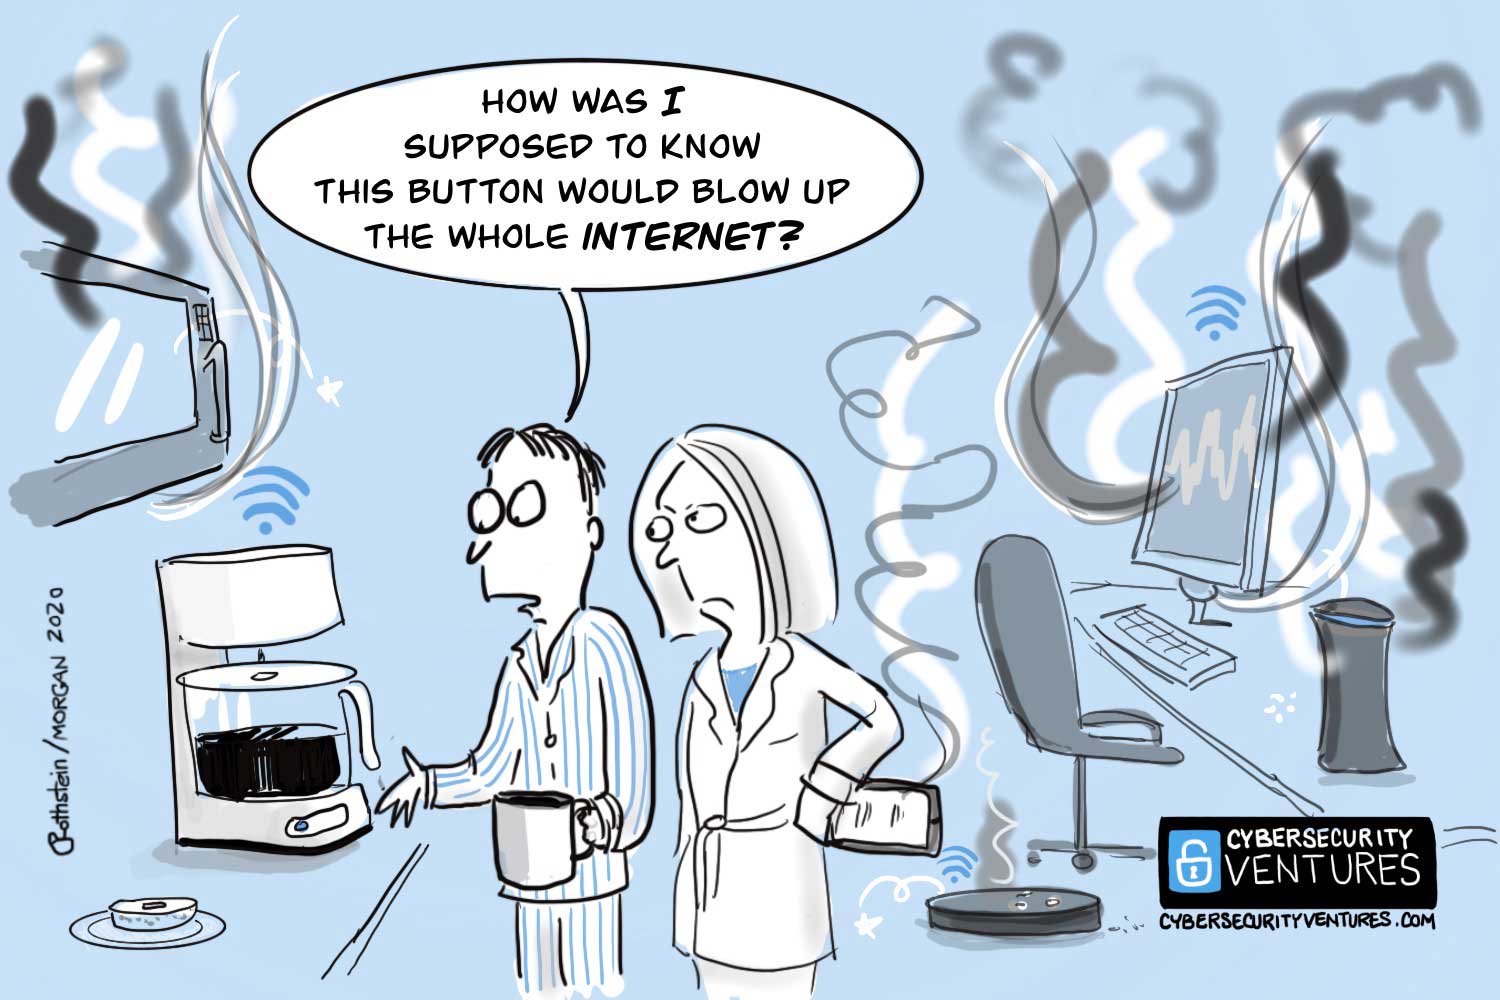 When coffee makers are demanding a ransom, you know IoT is screwed